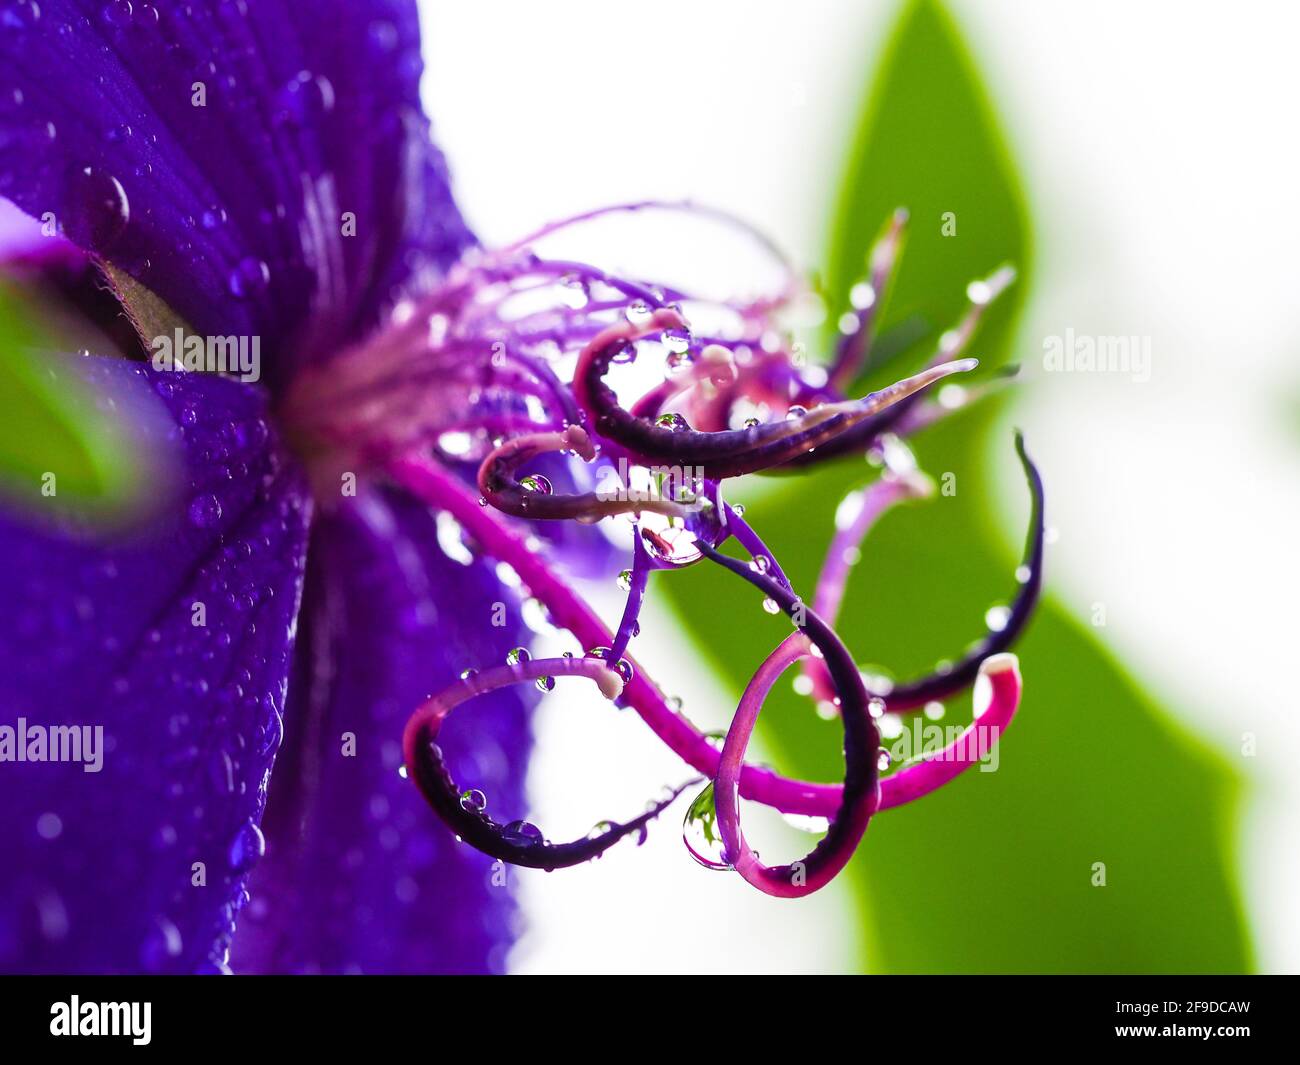 Water drops on flowers, macro of a tangled mess of curly stamens of a purple Tibouchina flower covered in raindrops, Australian coastal garden Stock Photo